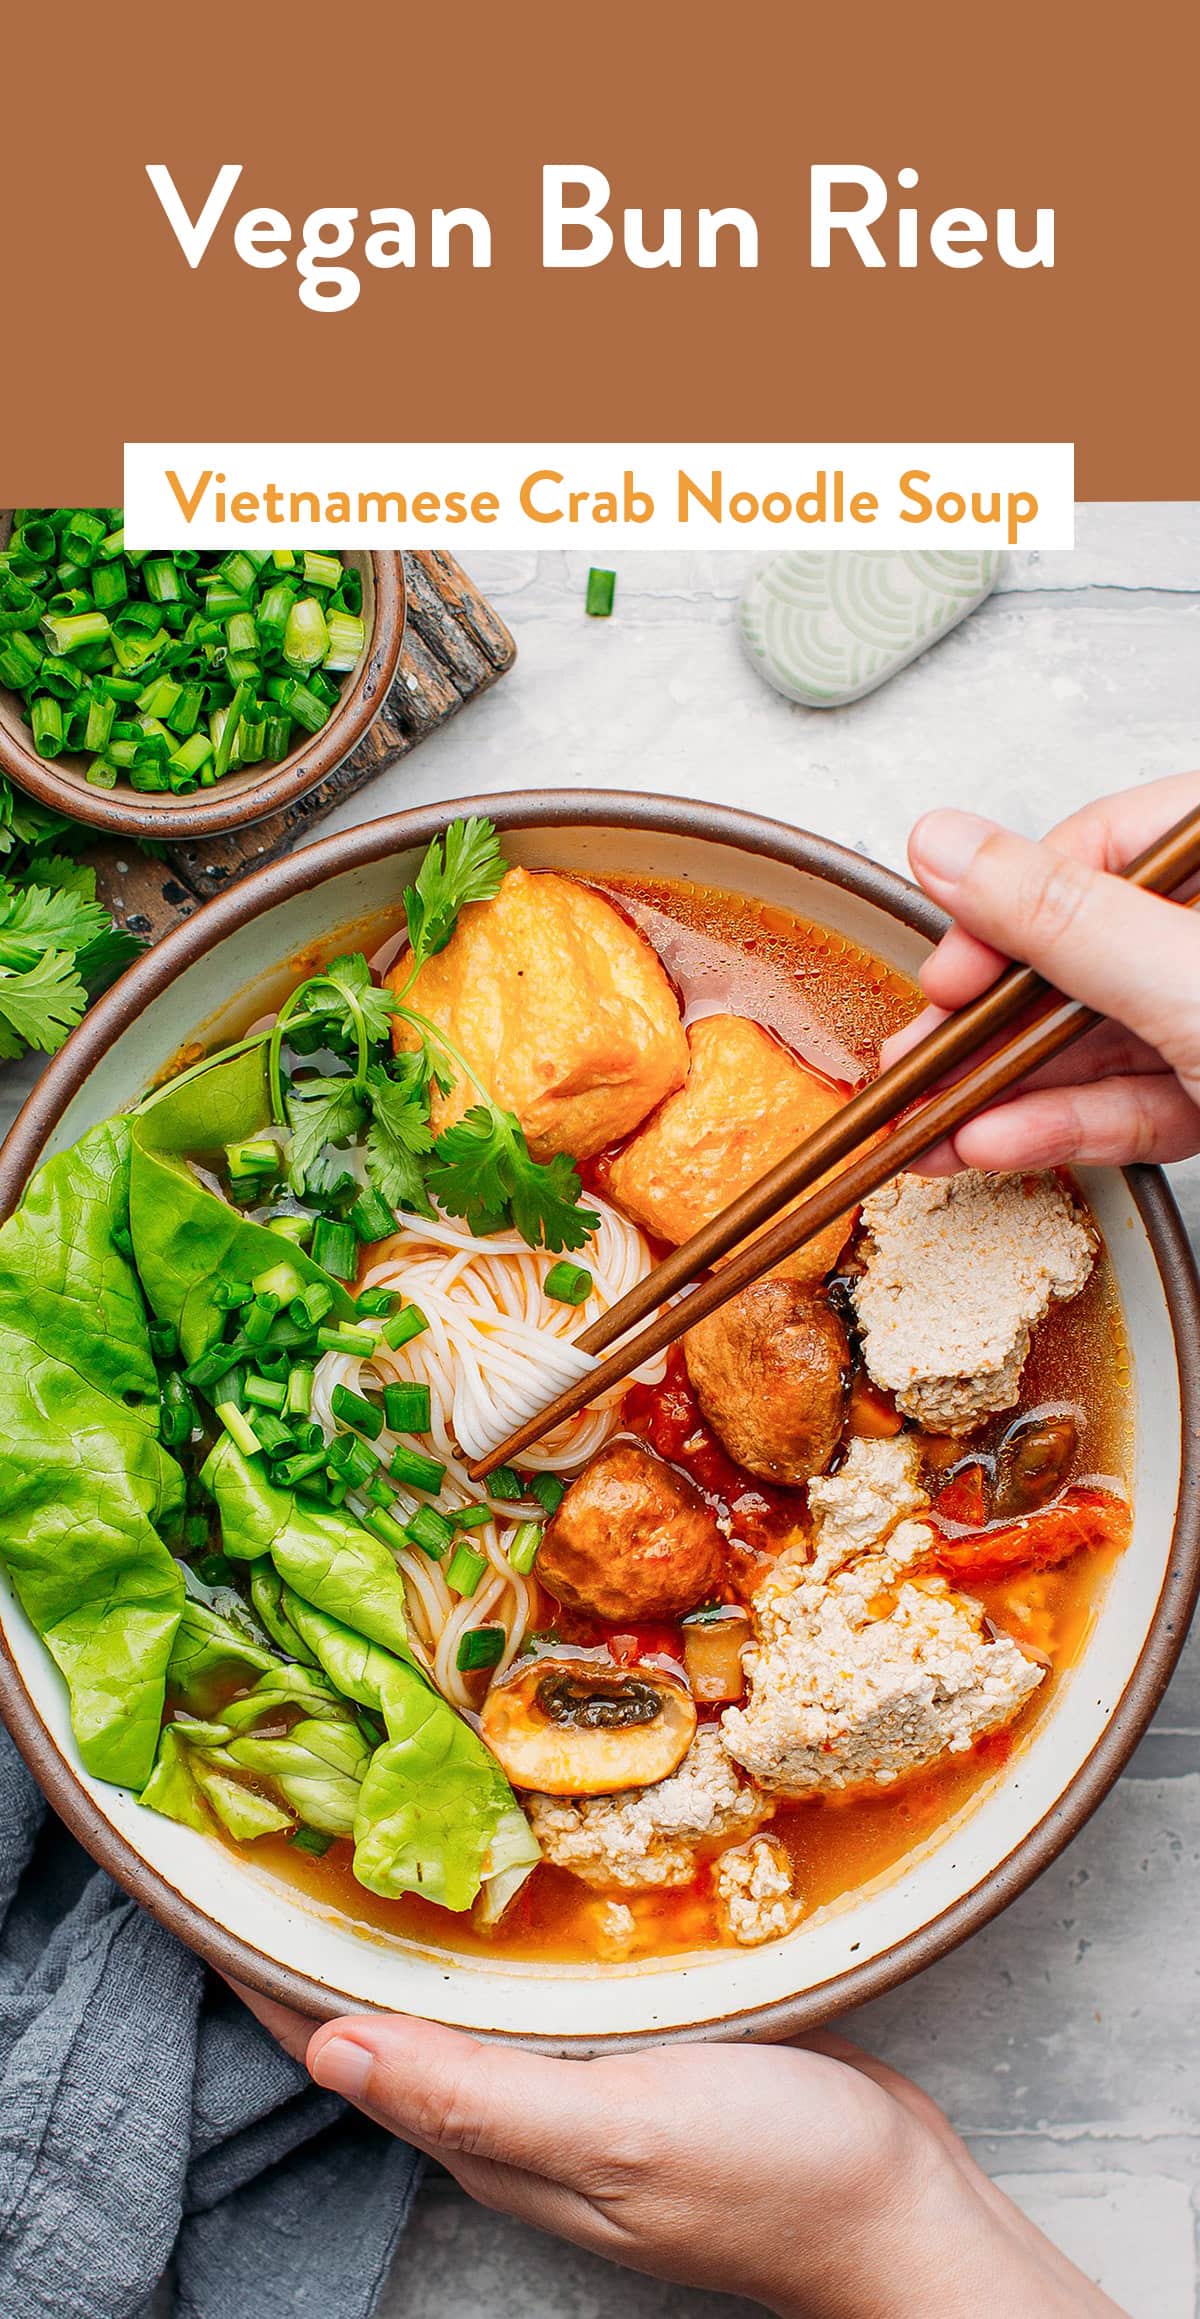 Vegan Bun Rieu (Bún riêu chay) is a traditional Vietnamese noodle soup prepared with a sweet and tangy tomato broth and served with rice noodles, mushrooms, tofu, and fresh herbs. This unique noodle soup is a symphony of flavors and texture. #vietnamese #vegan